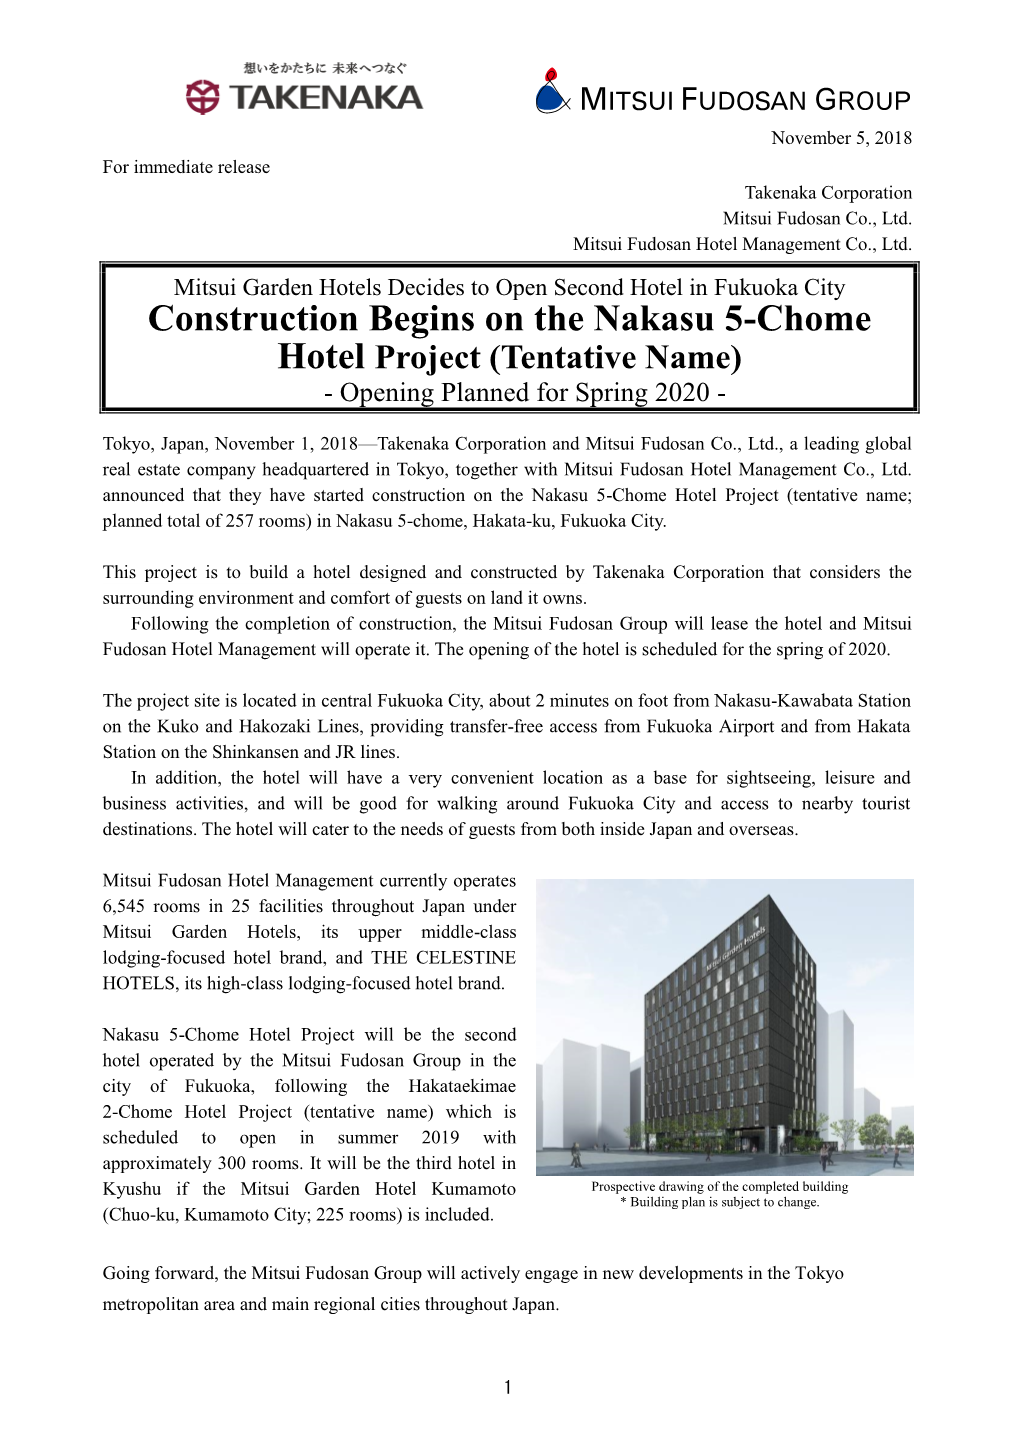 Construction Begins on the Nakasu 5-Chome Hotel Project (Tentative Name) - Opening Planned for Spring 2020